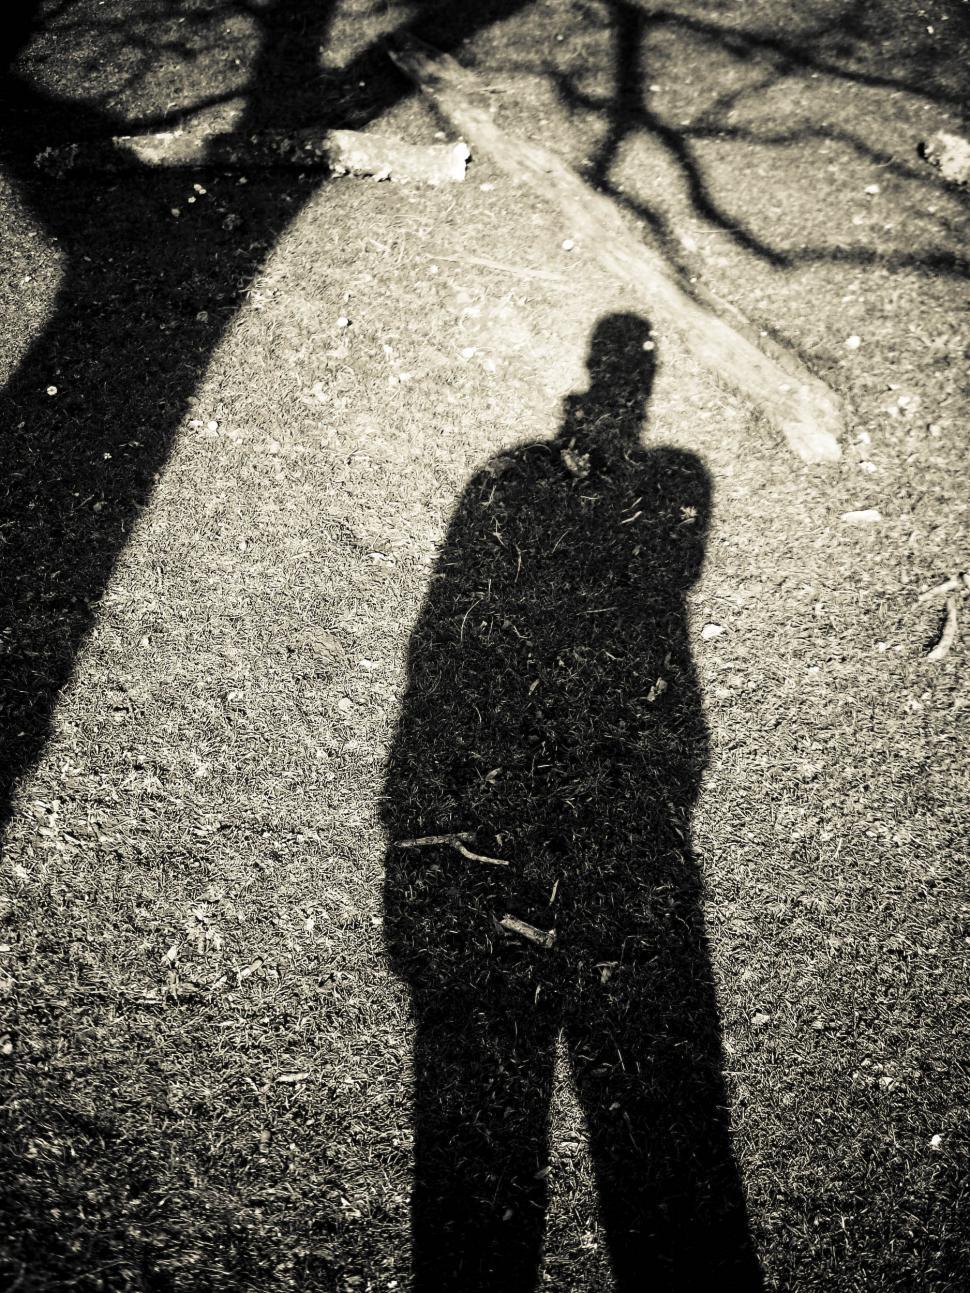 Download Free Stock Photo of shadow 